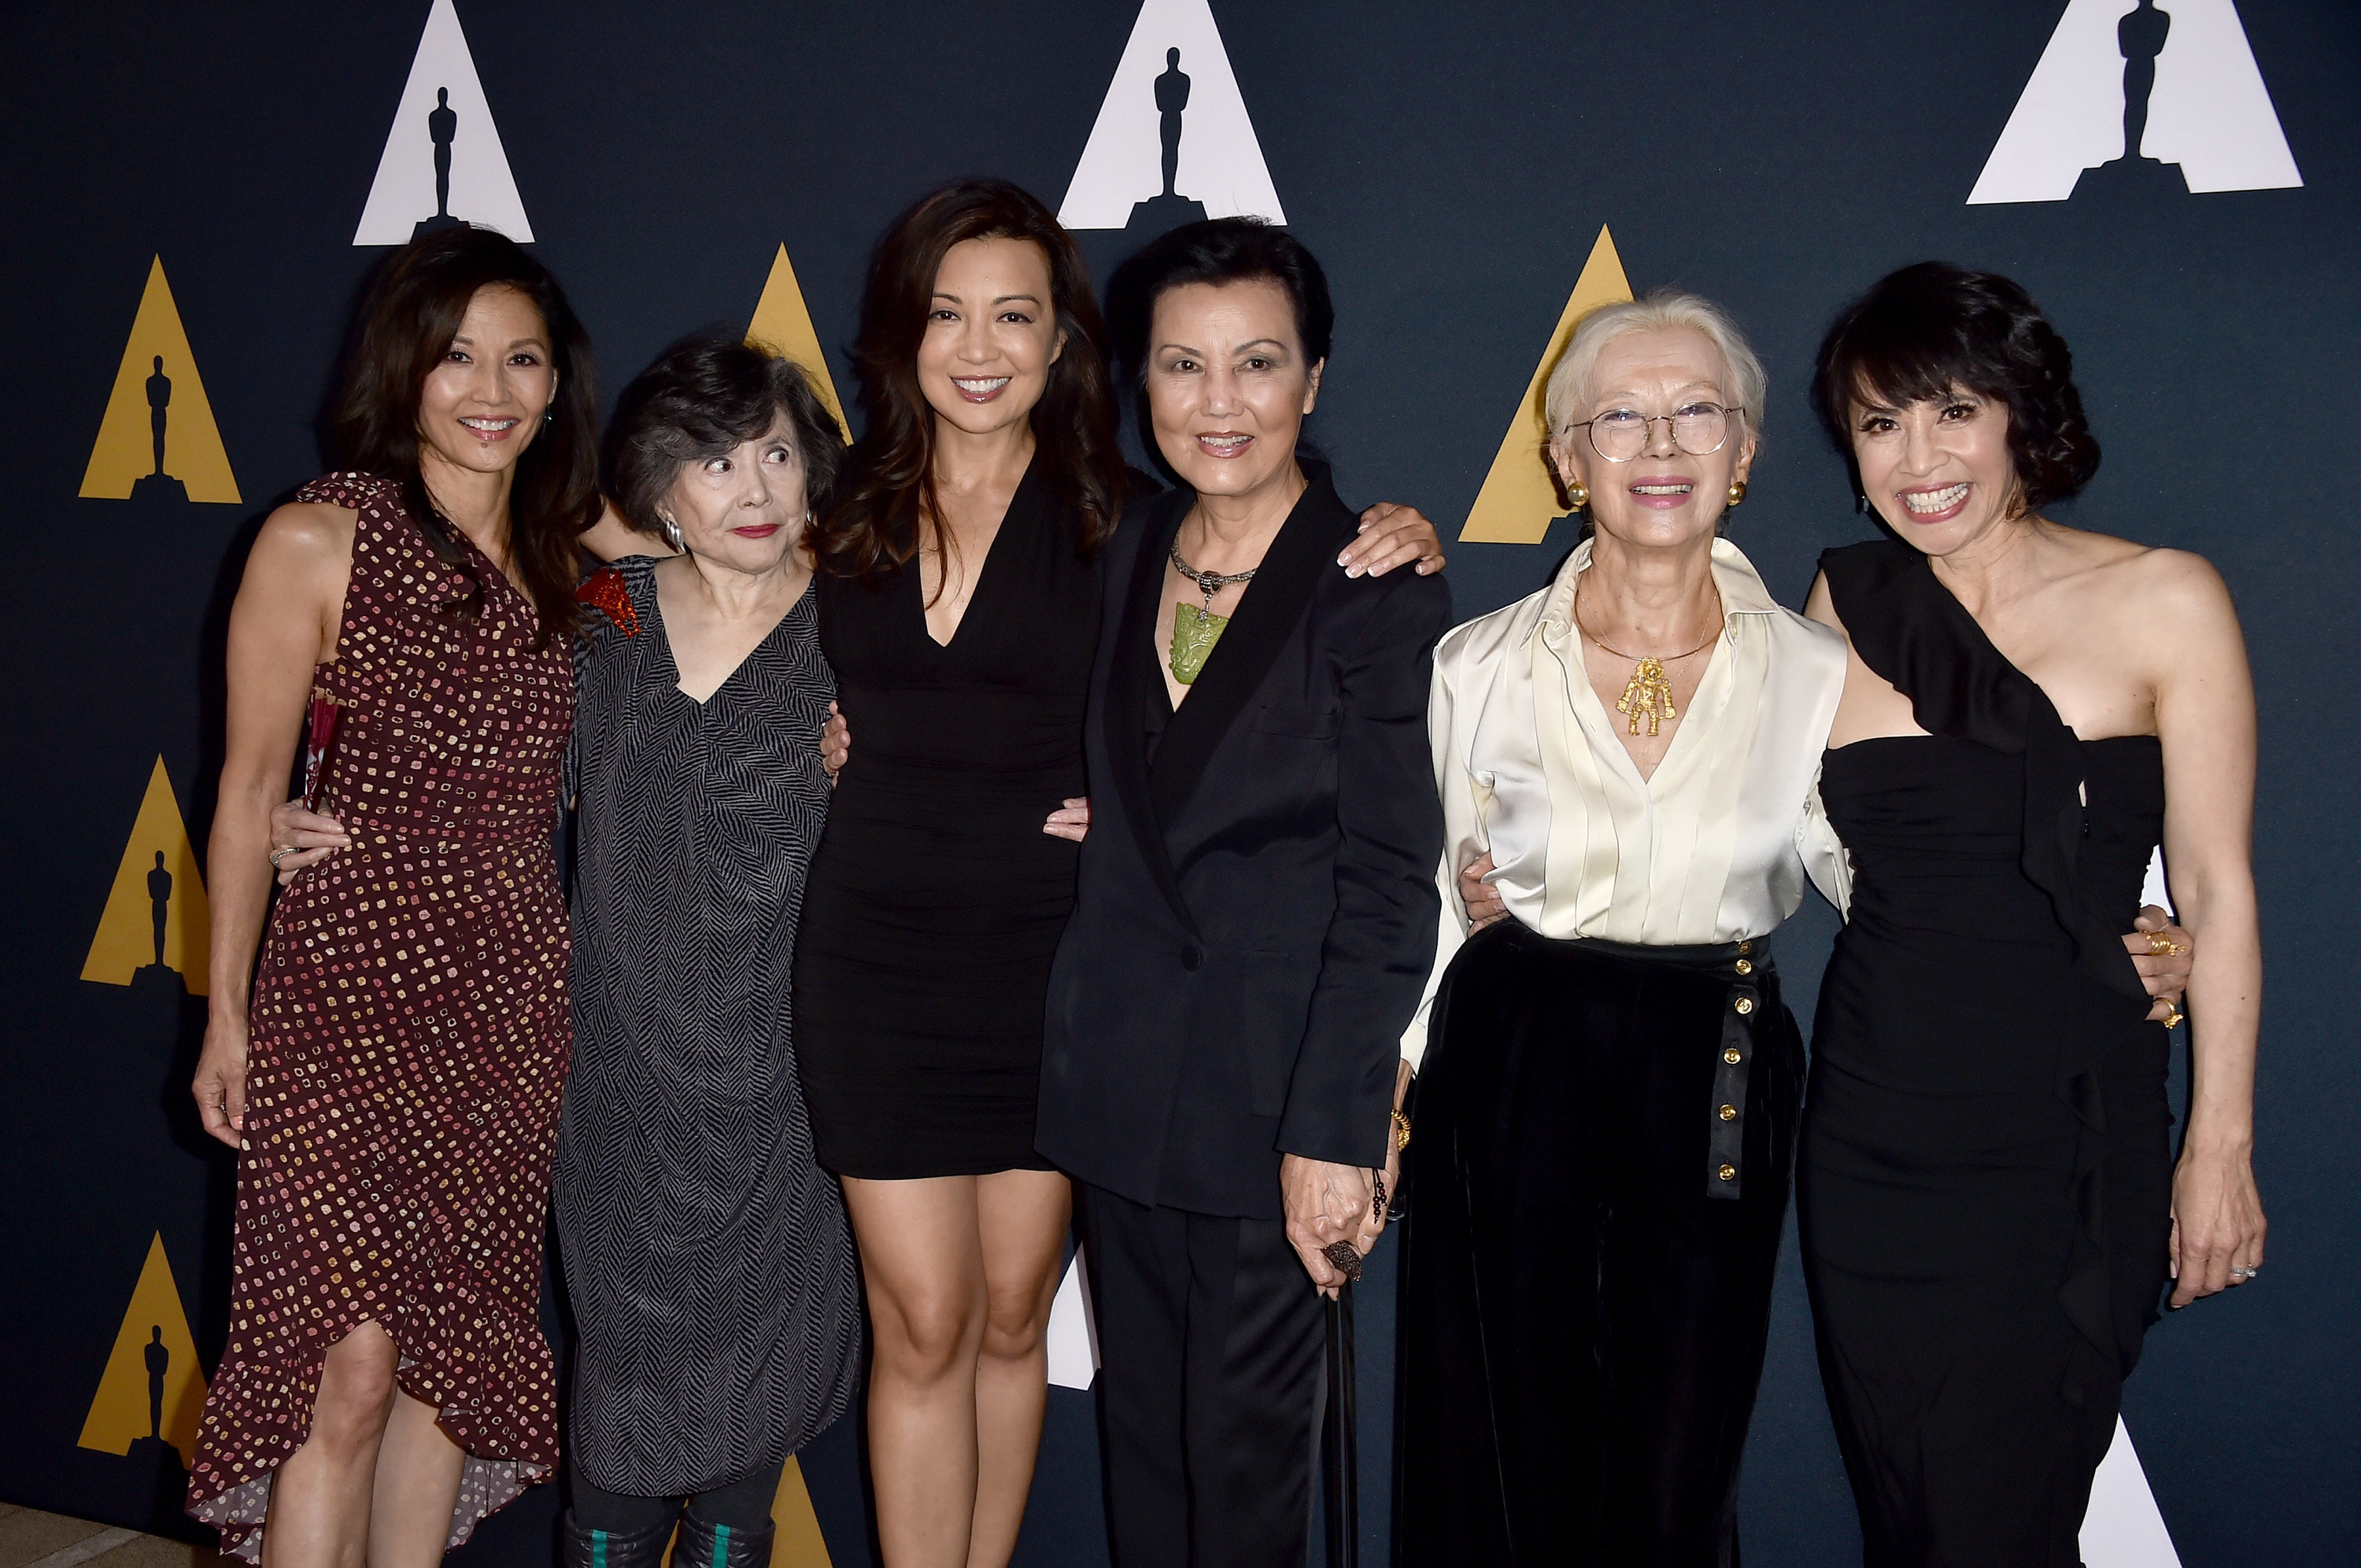 Tamlyn Tomita, Tsai Chin, Ming-na Wen, Kieu Chinh, France Nuyen and Lauren Tom attend The Academy Presents &quot;The Joy Luck Club&quot; (1993) 25th Anniversary at The Samuel Goldwyn Theater on August 22, 2018 in Beverly Hills, California